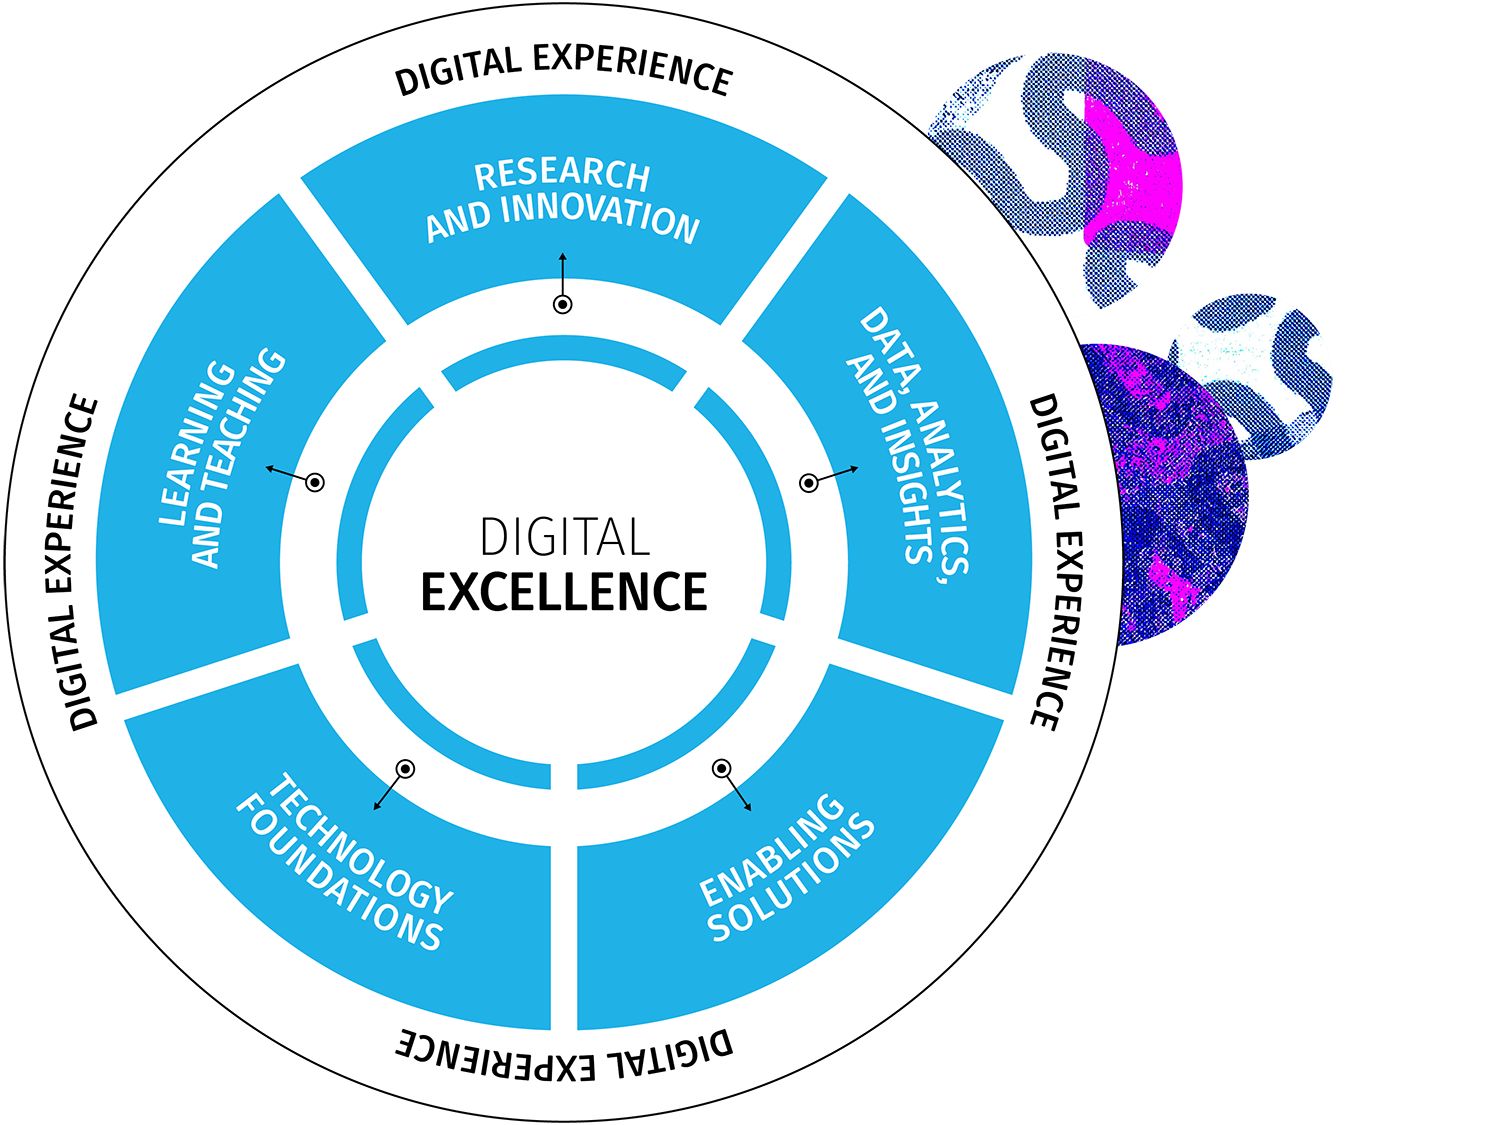 The six priority areas of the Digital Excellence Strategy are Digital experience, Learning and teaching, Research and innovation, Data, analytics and insights, Enabling solutions, Technology Foundations.